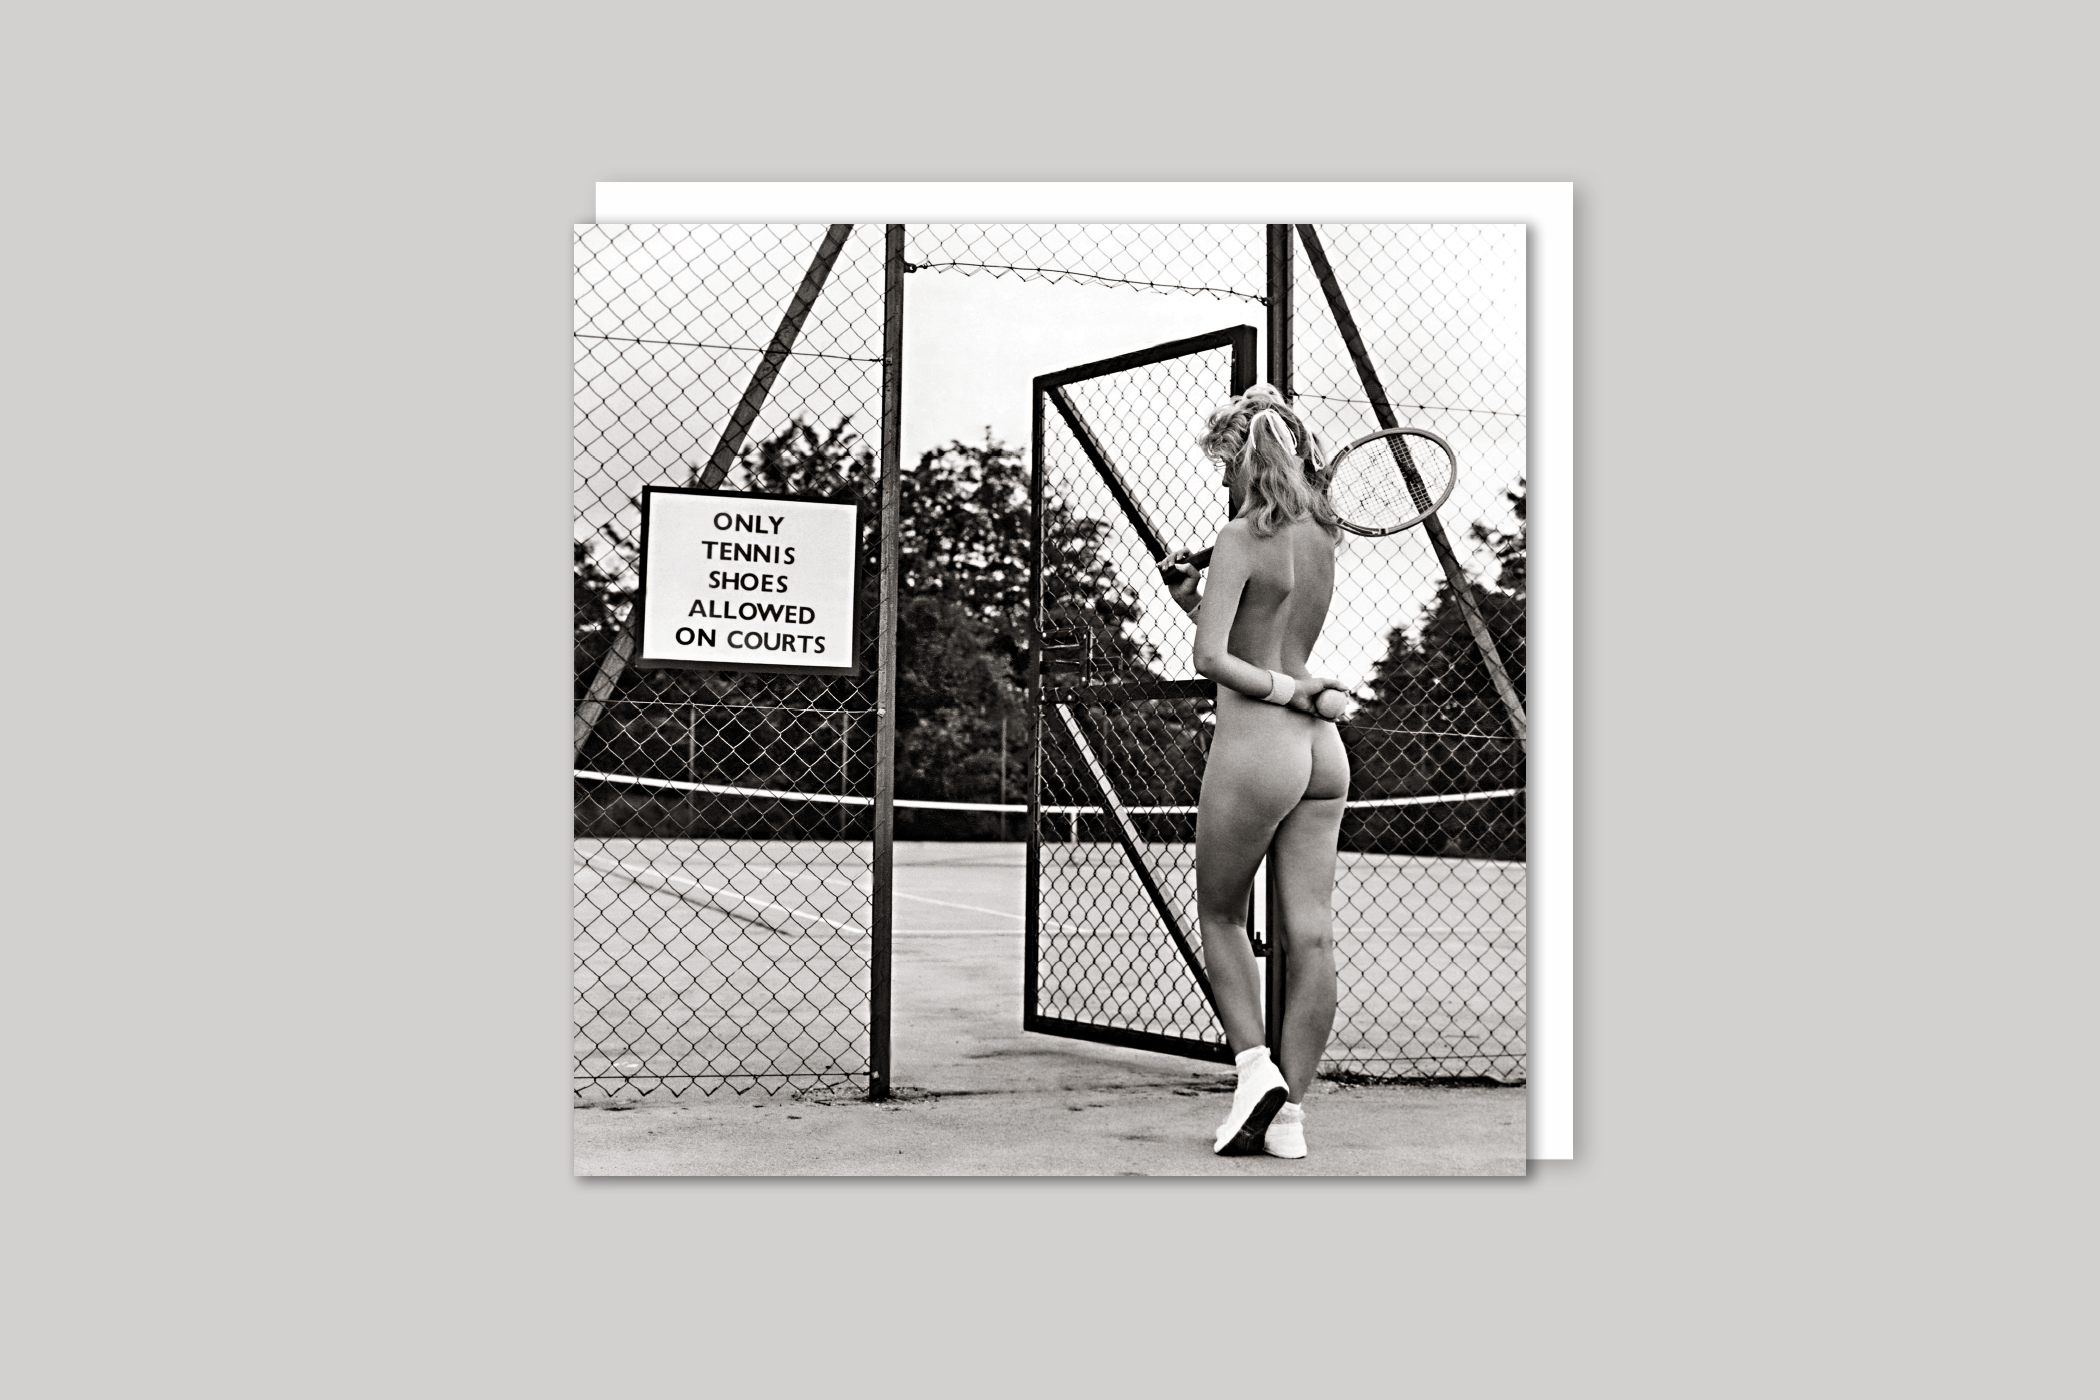 Tennis Anyone? retro photograph from Exposure range of photographic cards by Icon, back page.